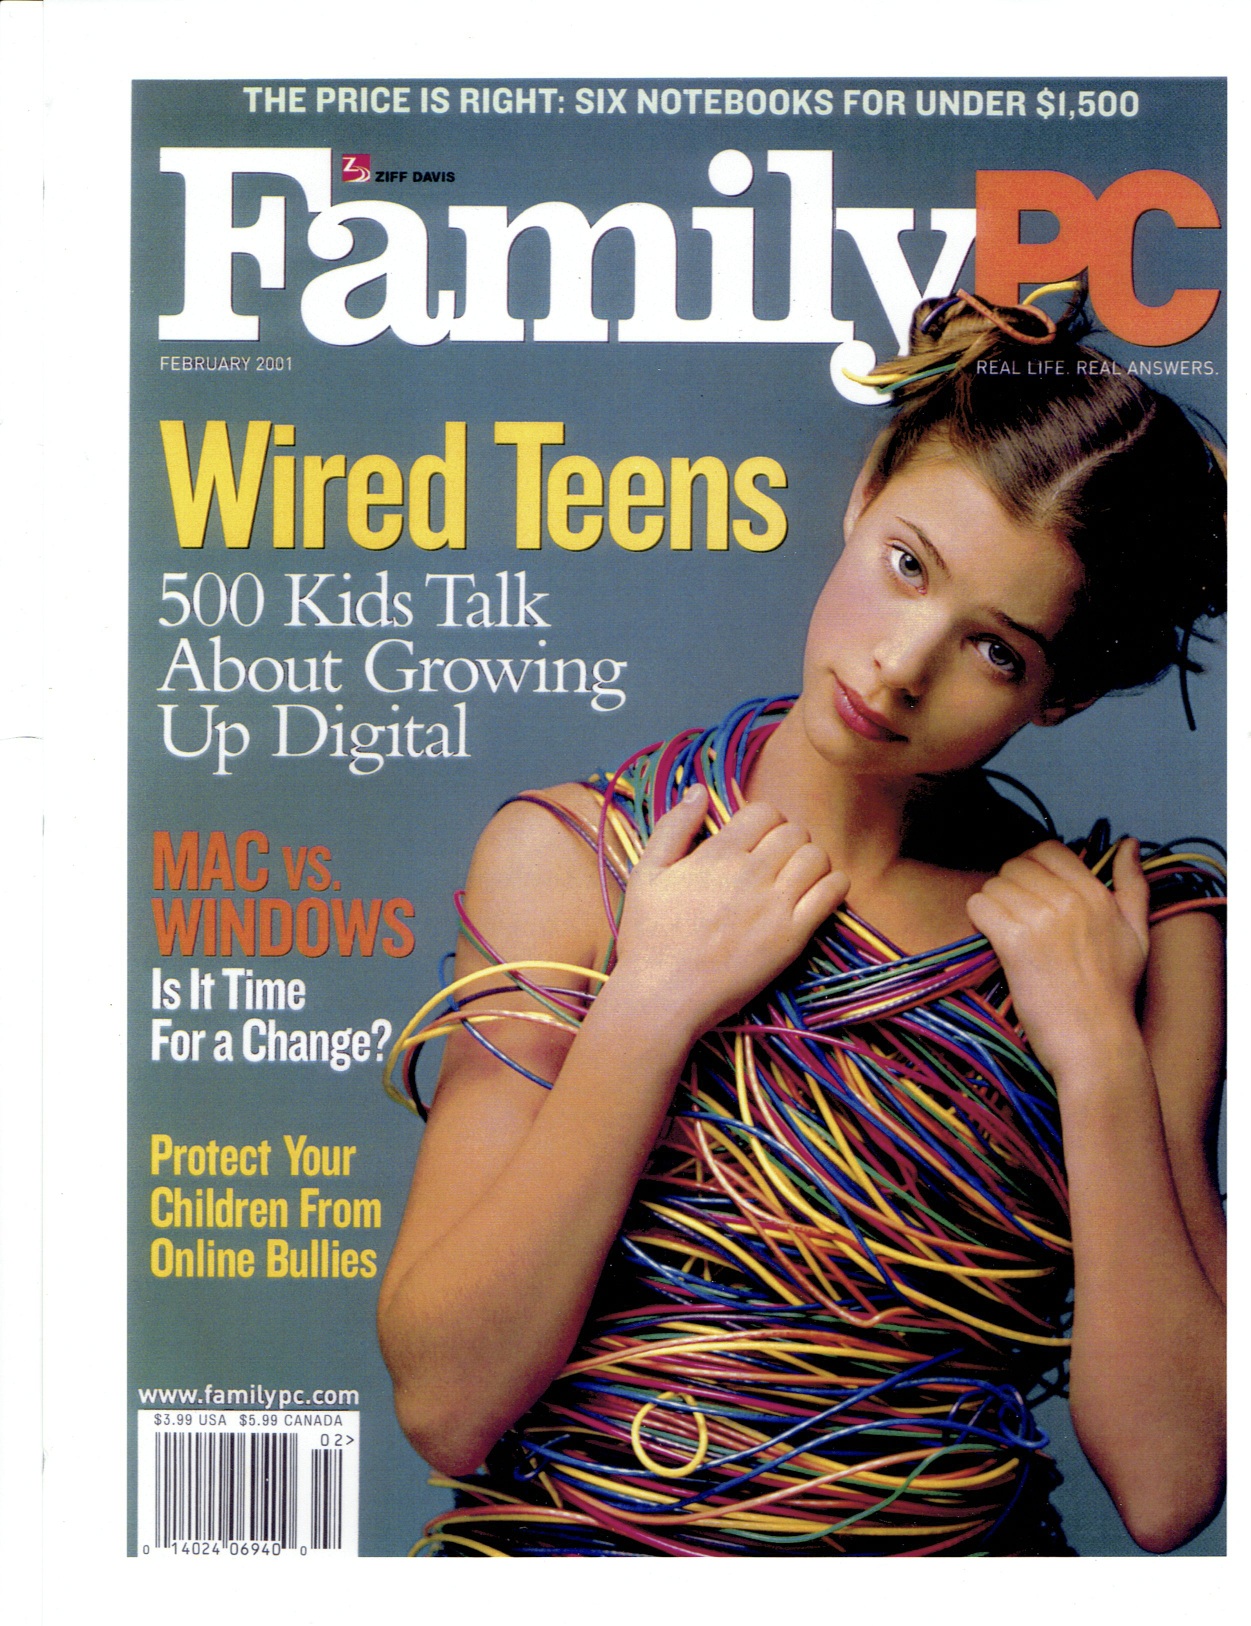 Family PC - Wired Teens